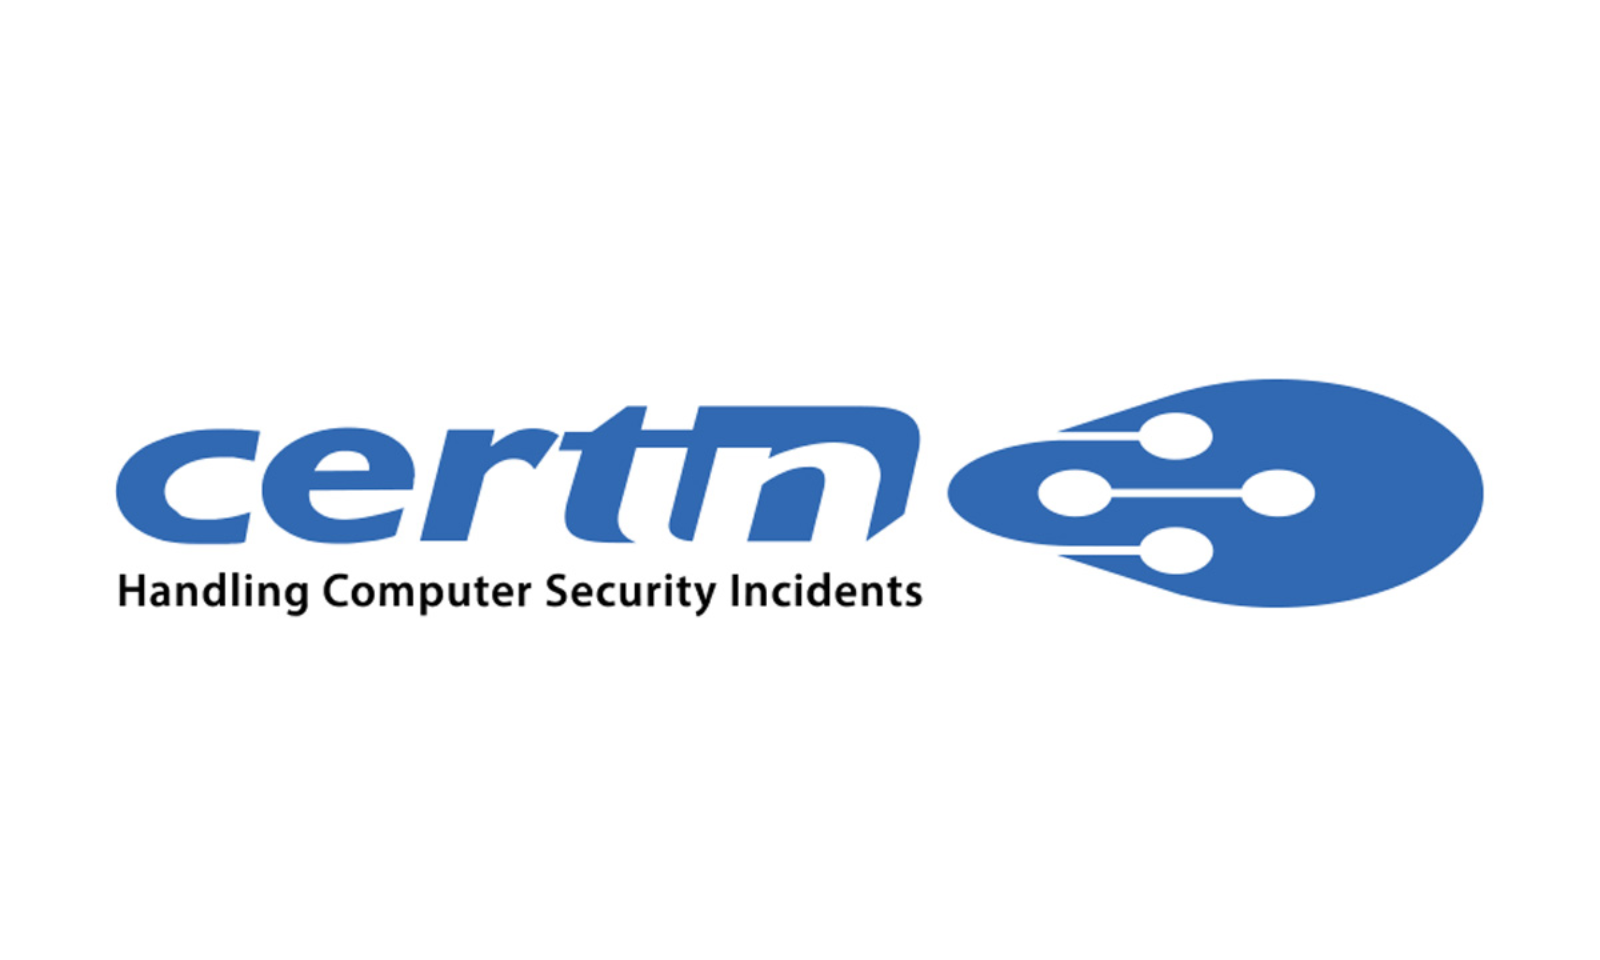 CERT-In: The first responders of the Indian cyberspace